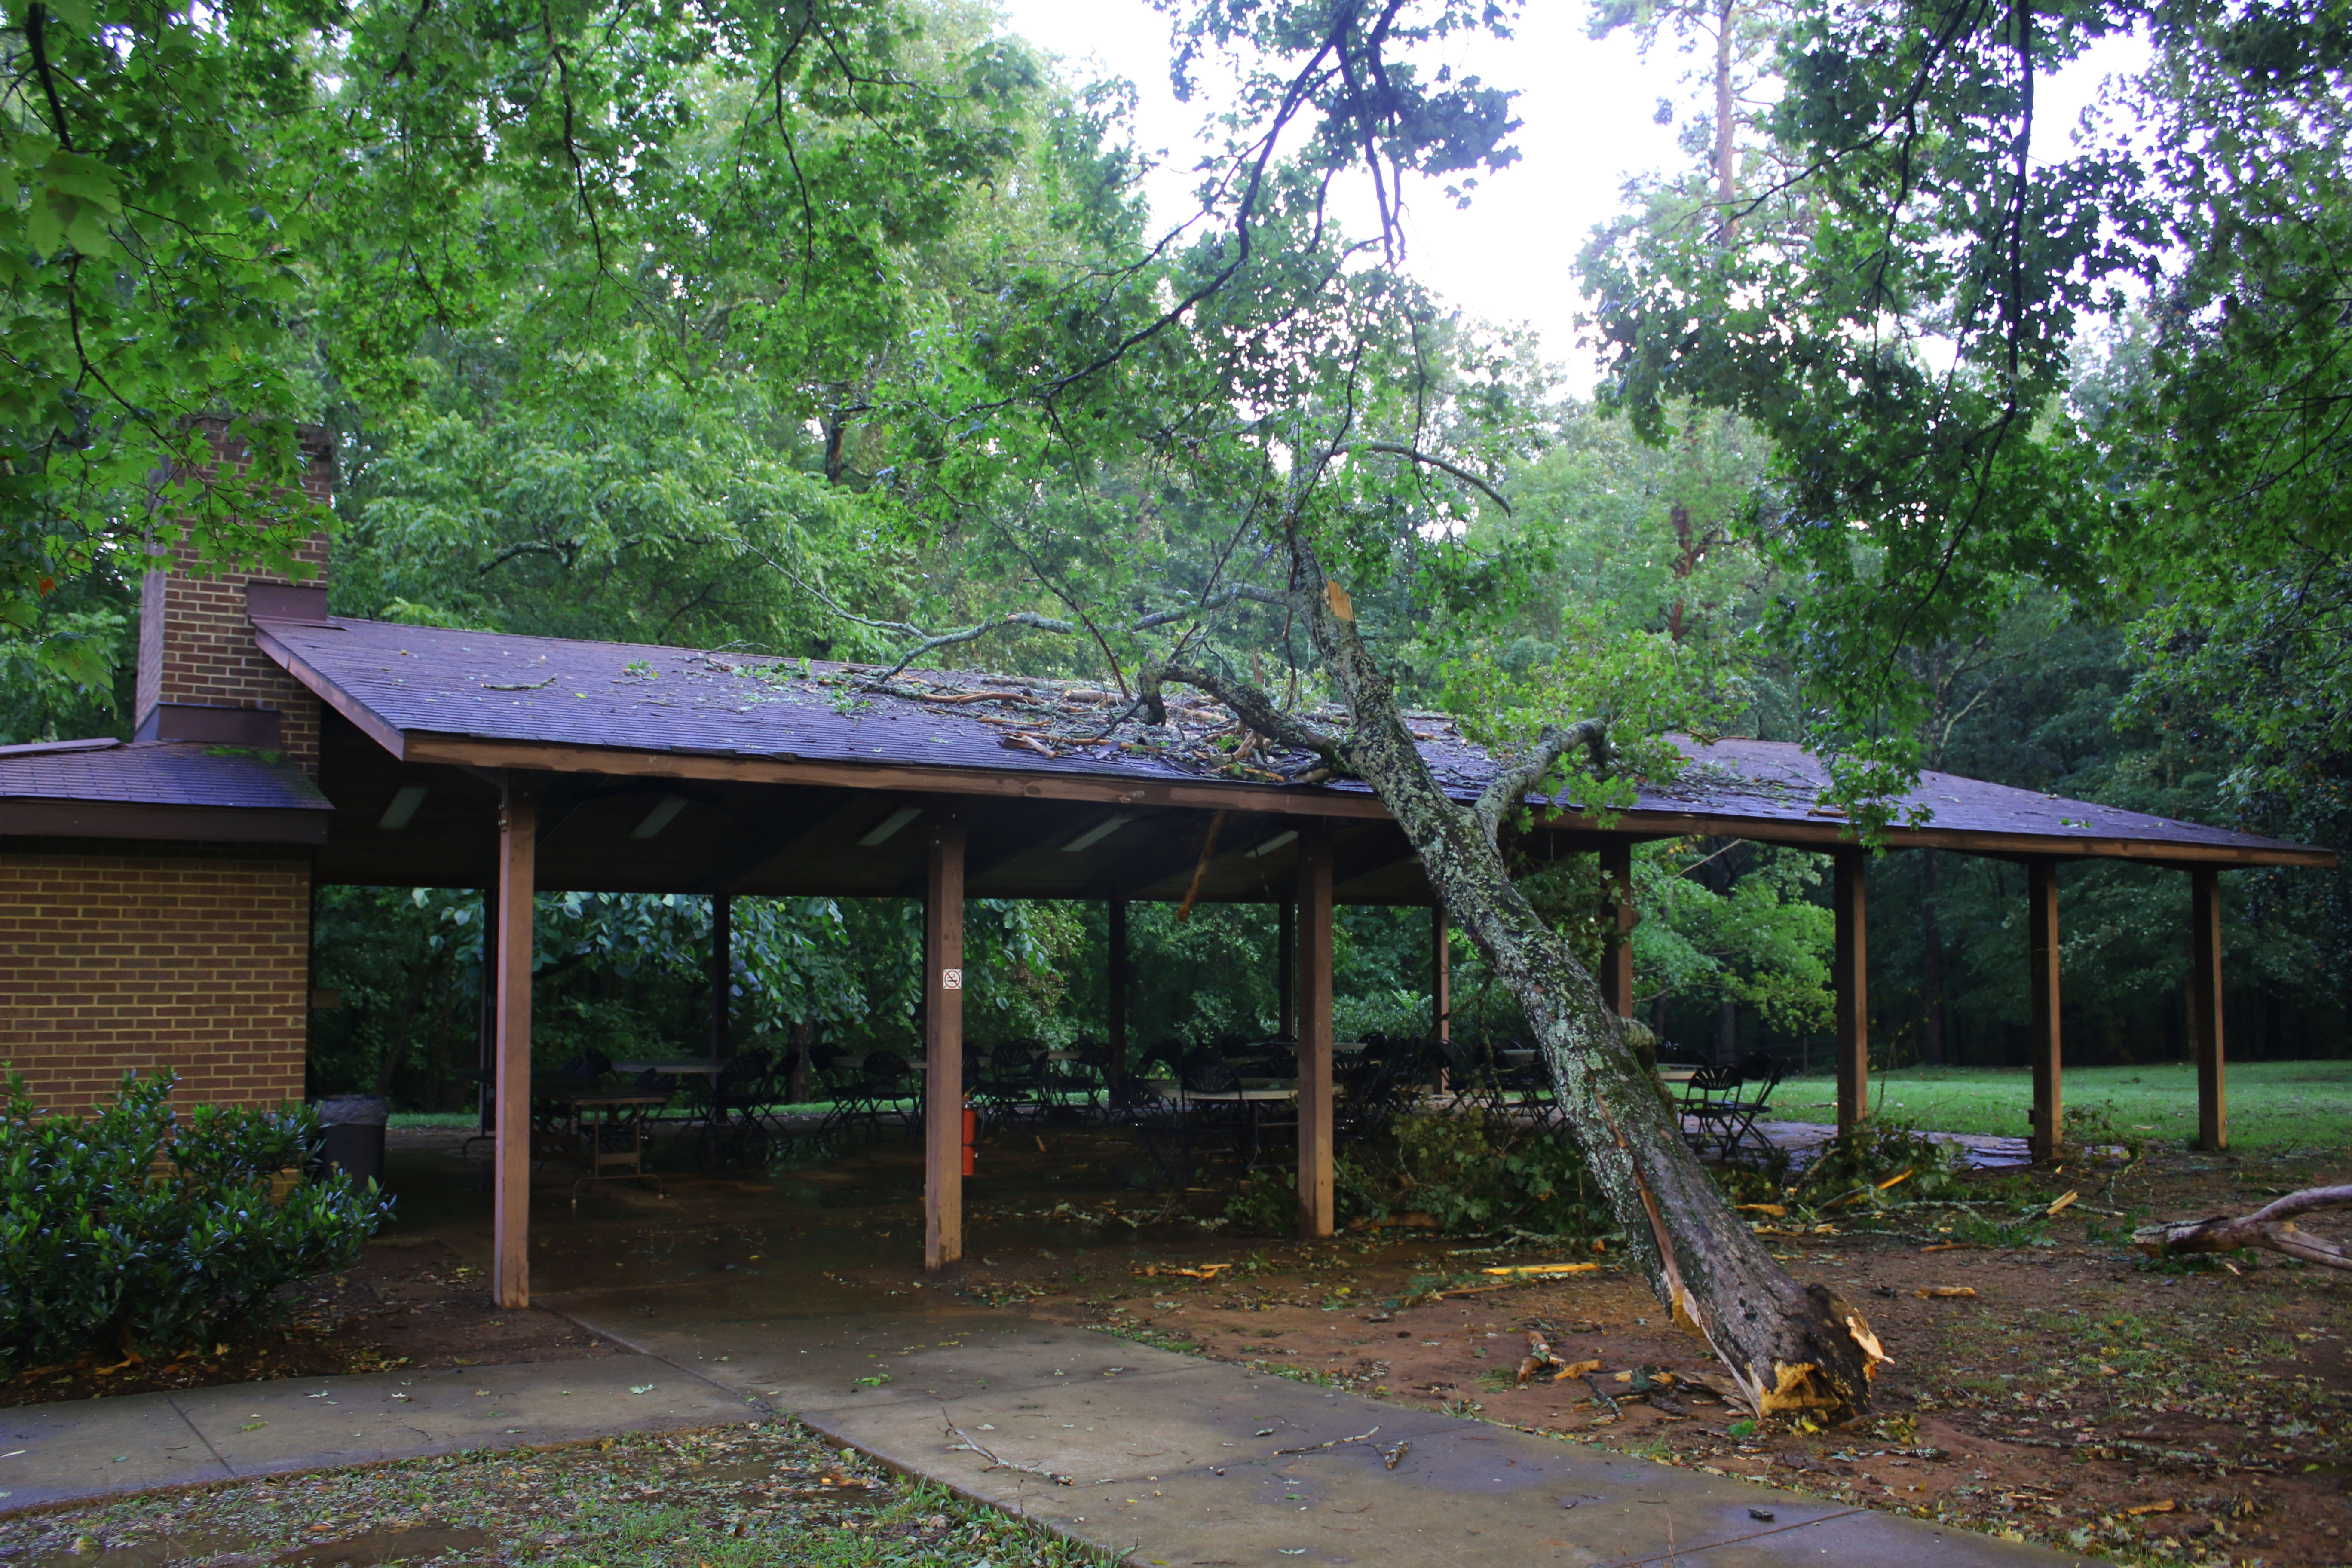 Fallen tree pierces roof of pavilion next to college woods. Photo by Clair Scott.